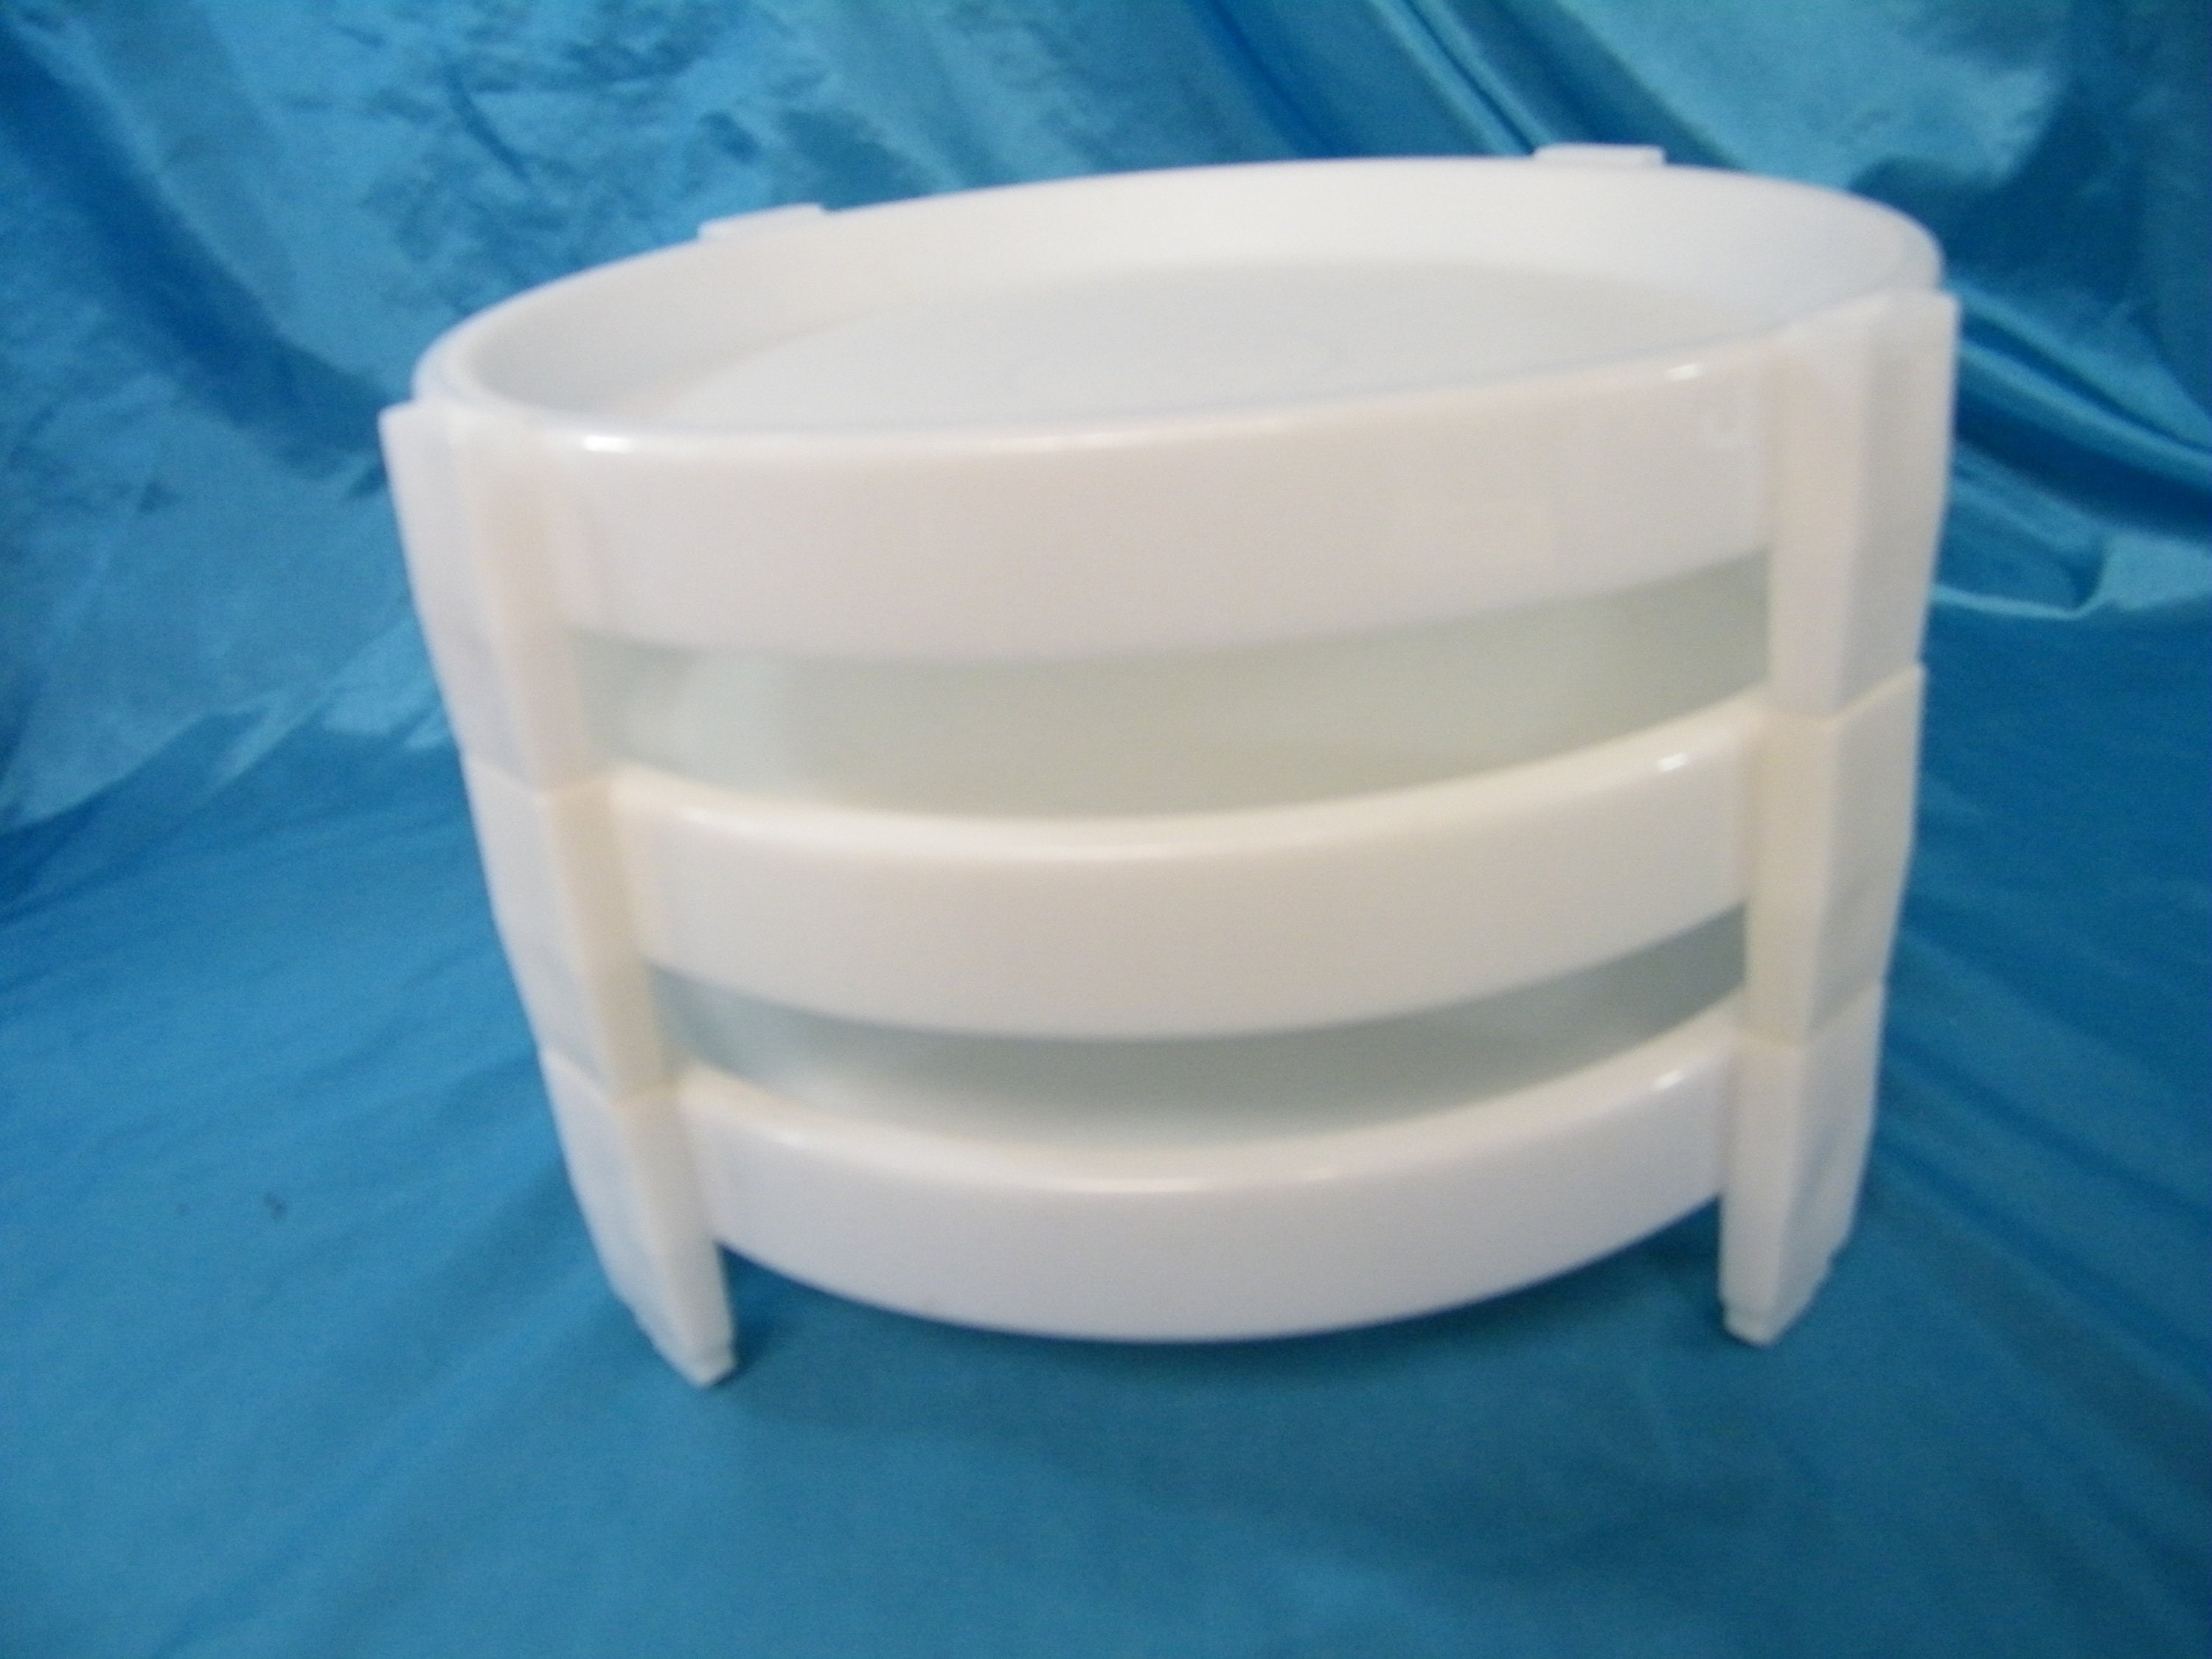 Tupperware Pie Rack - White 3 Piece - (Yellowed with Age) -Divide a Rack  - Stackable Pie Stand